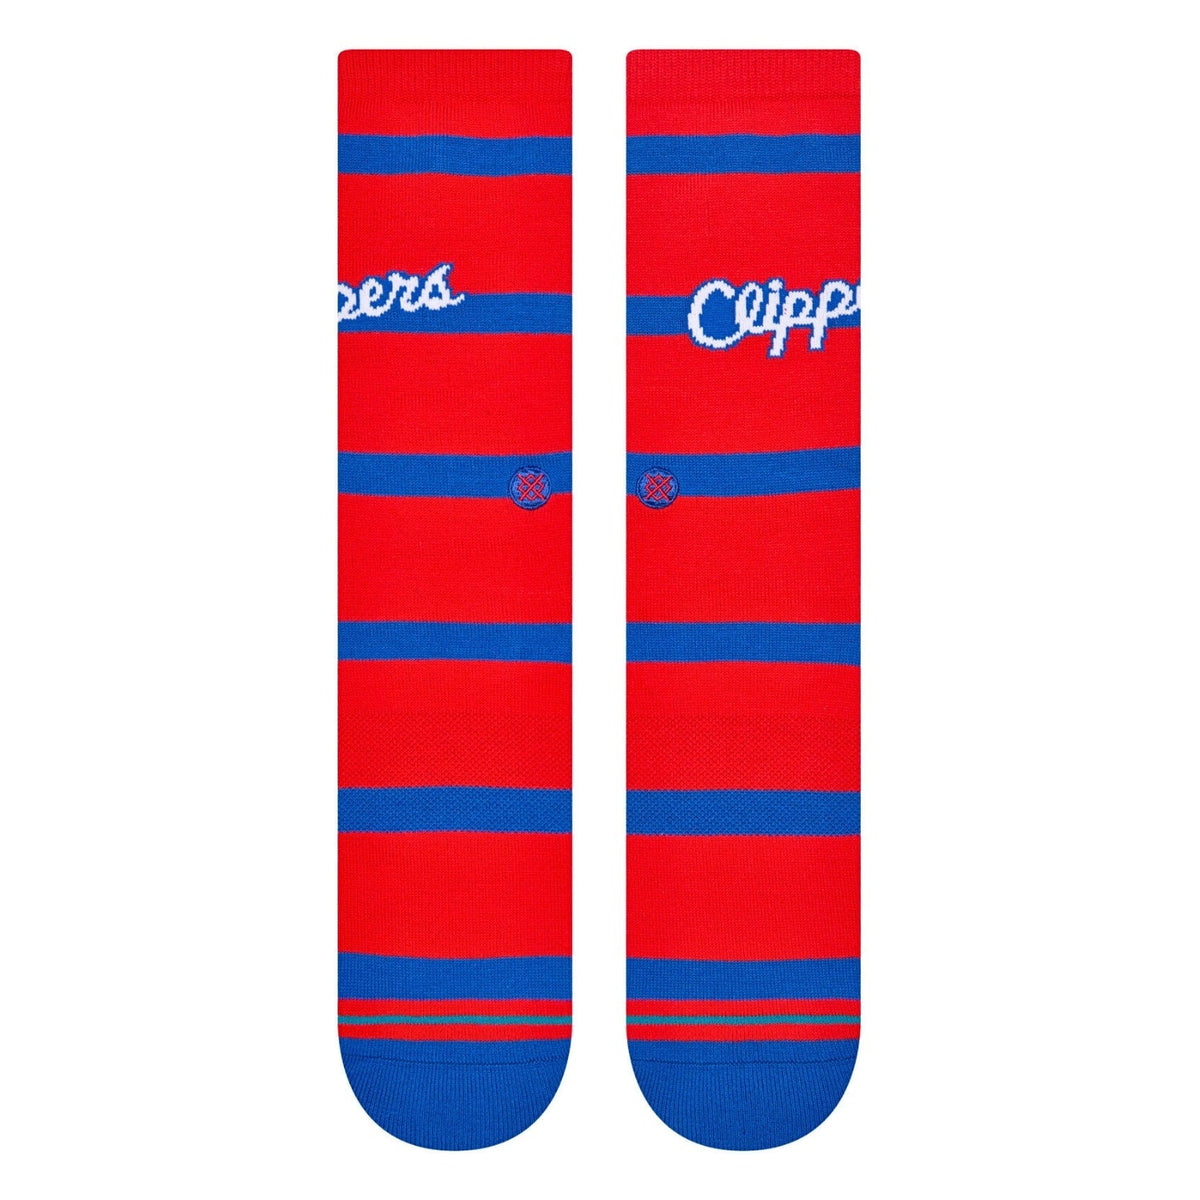 Stance Classics Clippers Socks - Red - Mens Crew Length Socks by Stance L (UK8-12.5)